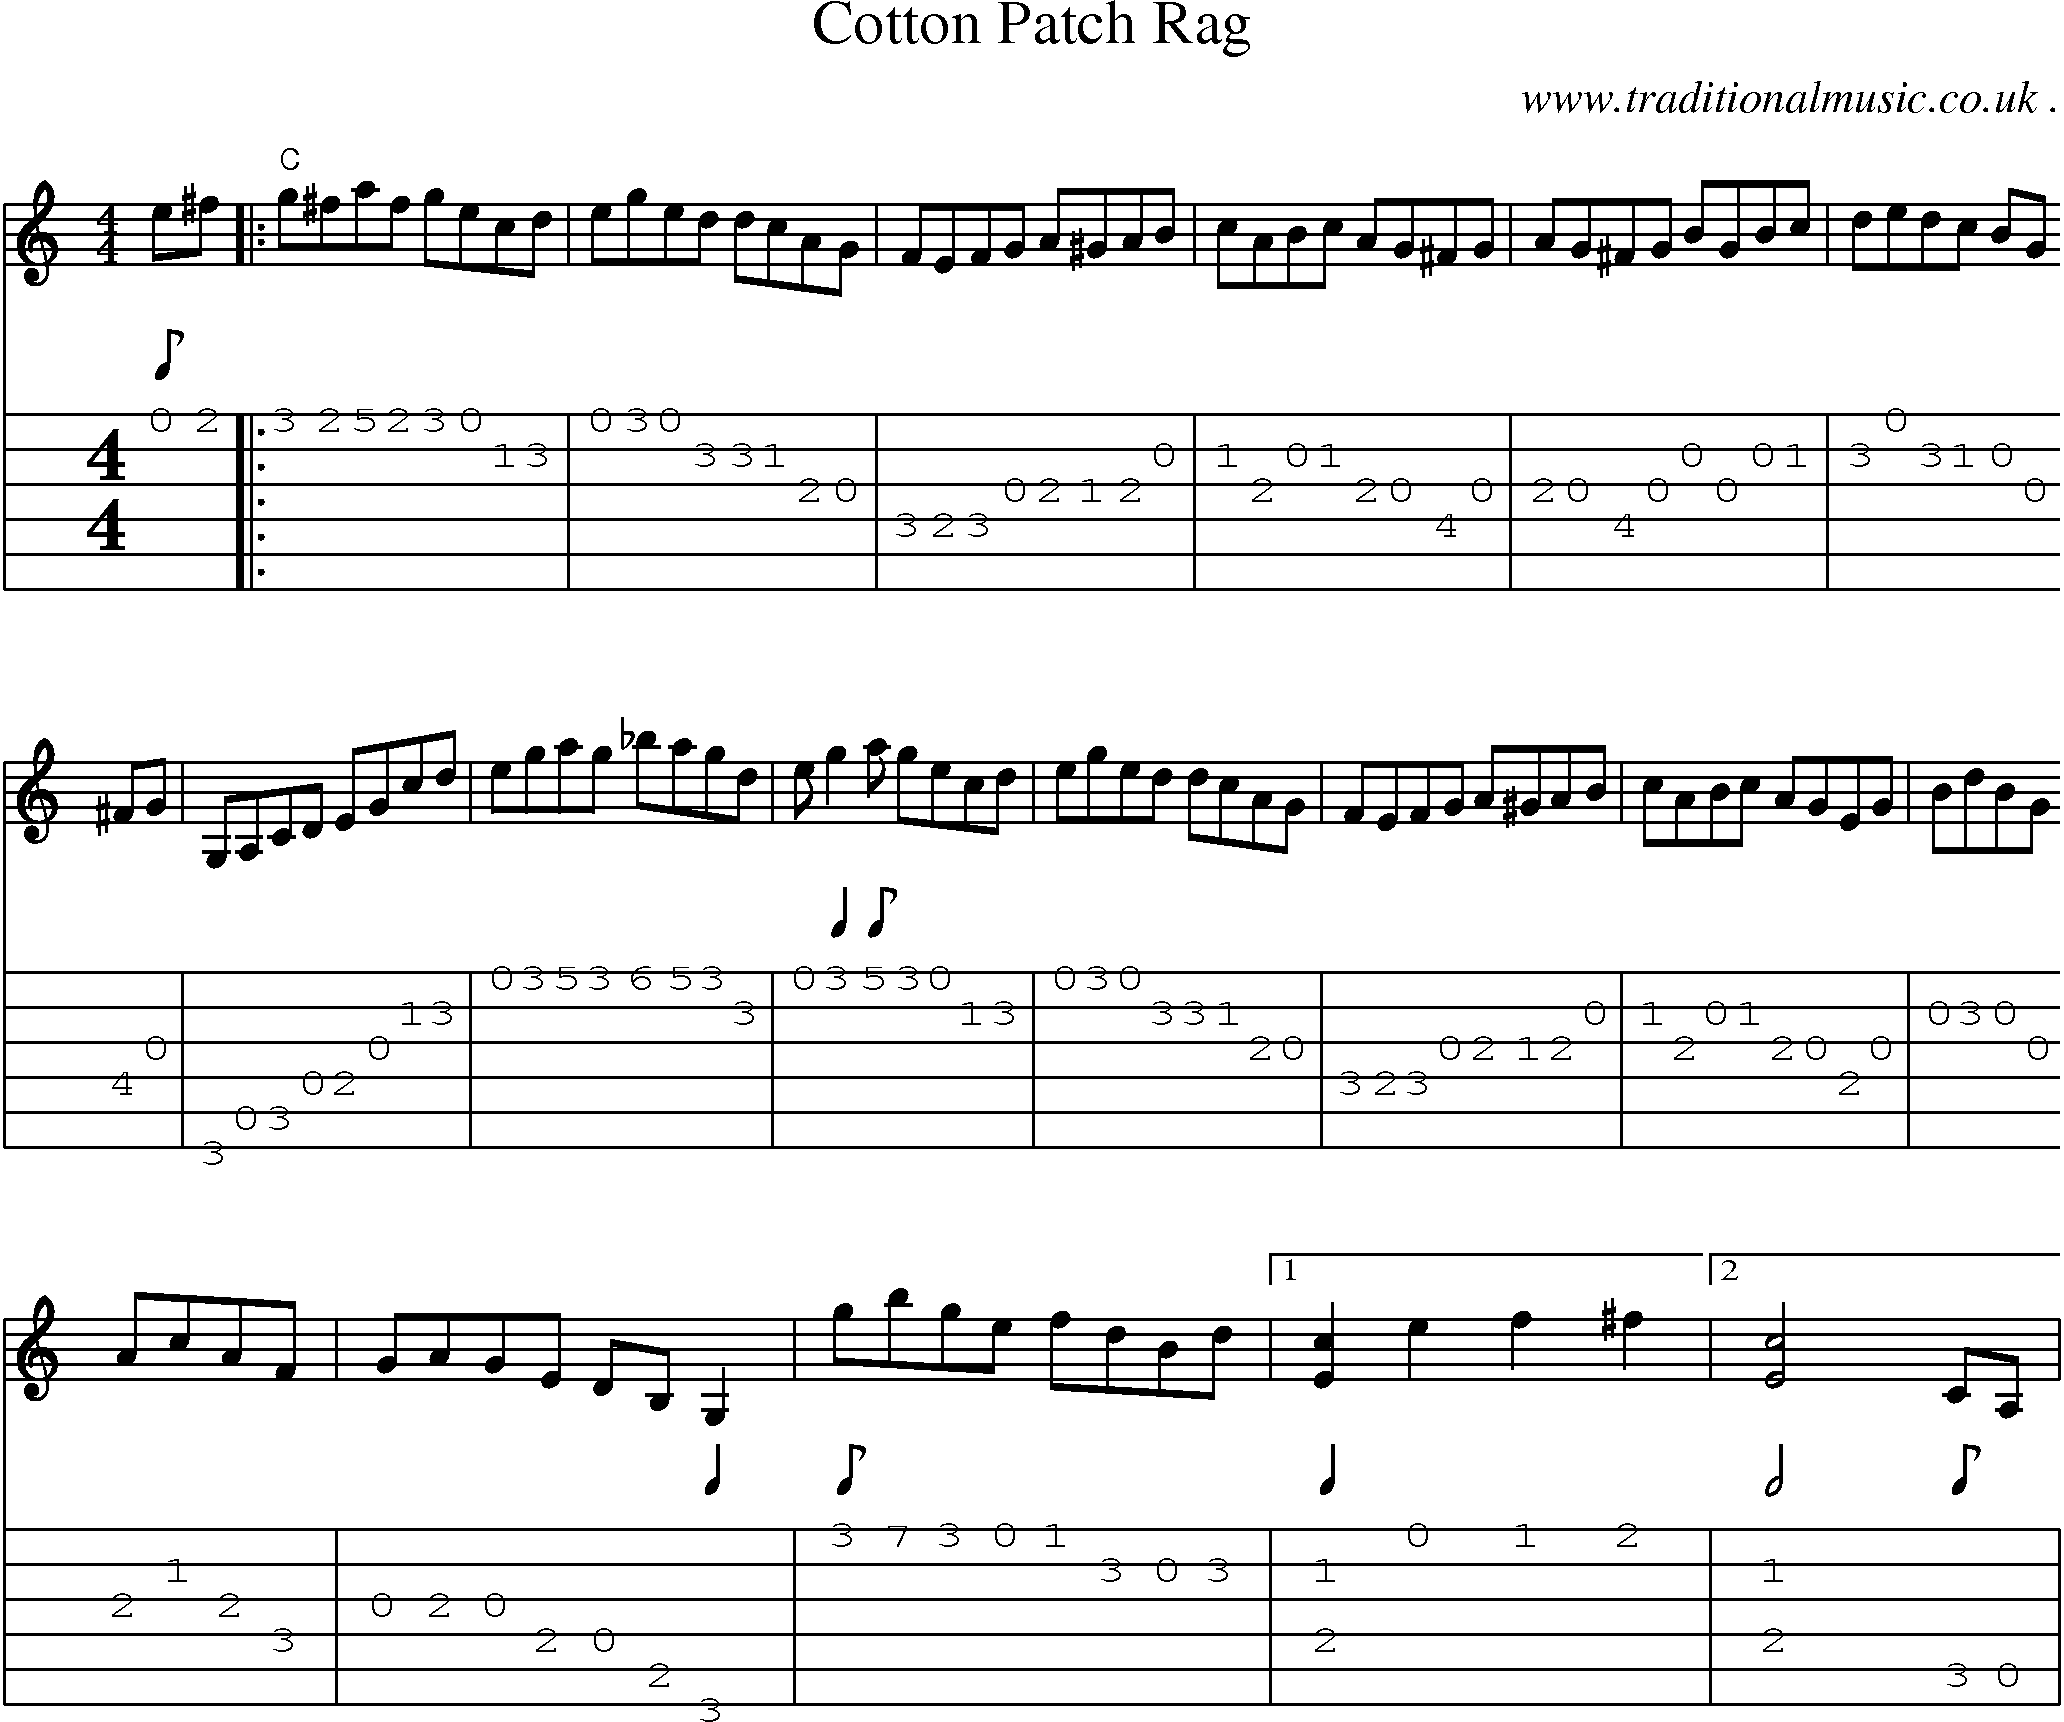 Music Score and Guitar Tabs for Cotton Patch Rag